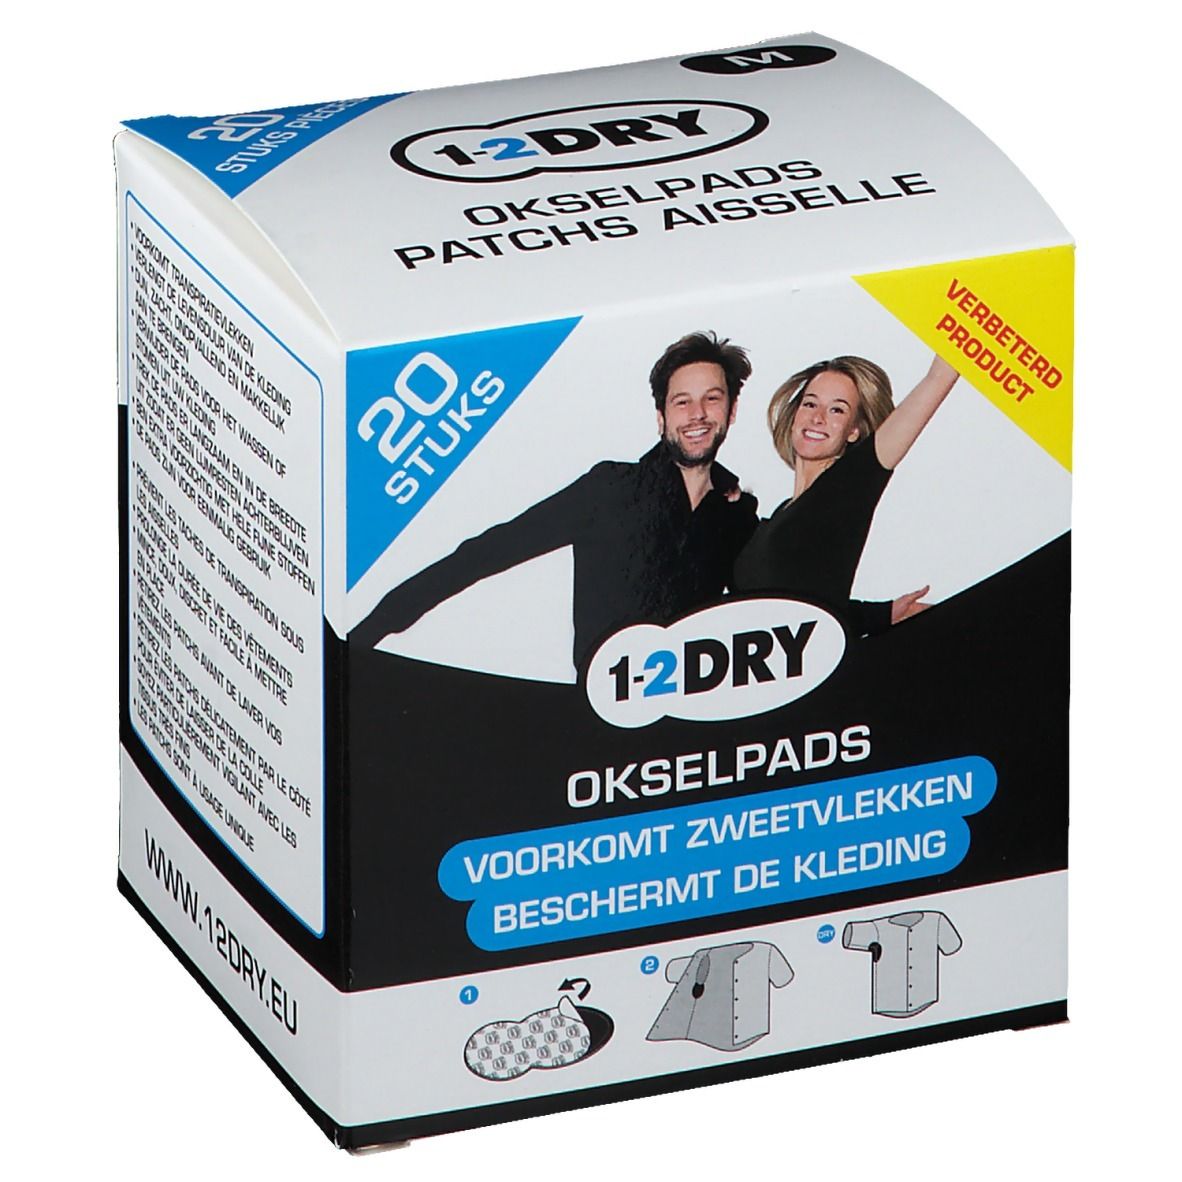 1-2DRY Patches Aiselle Dark Medium P2-BX-MD